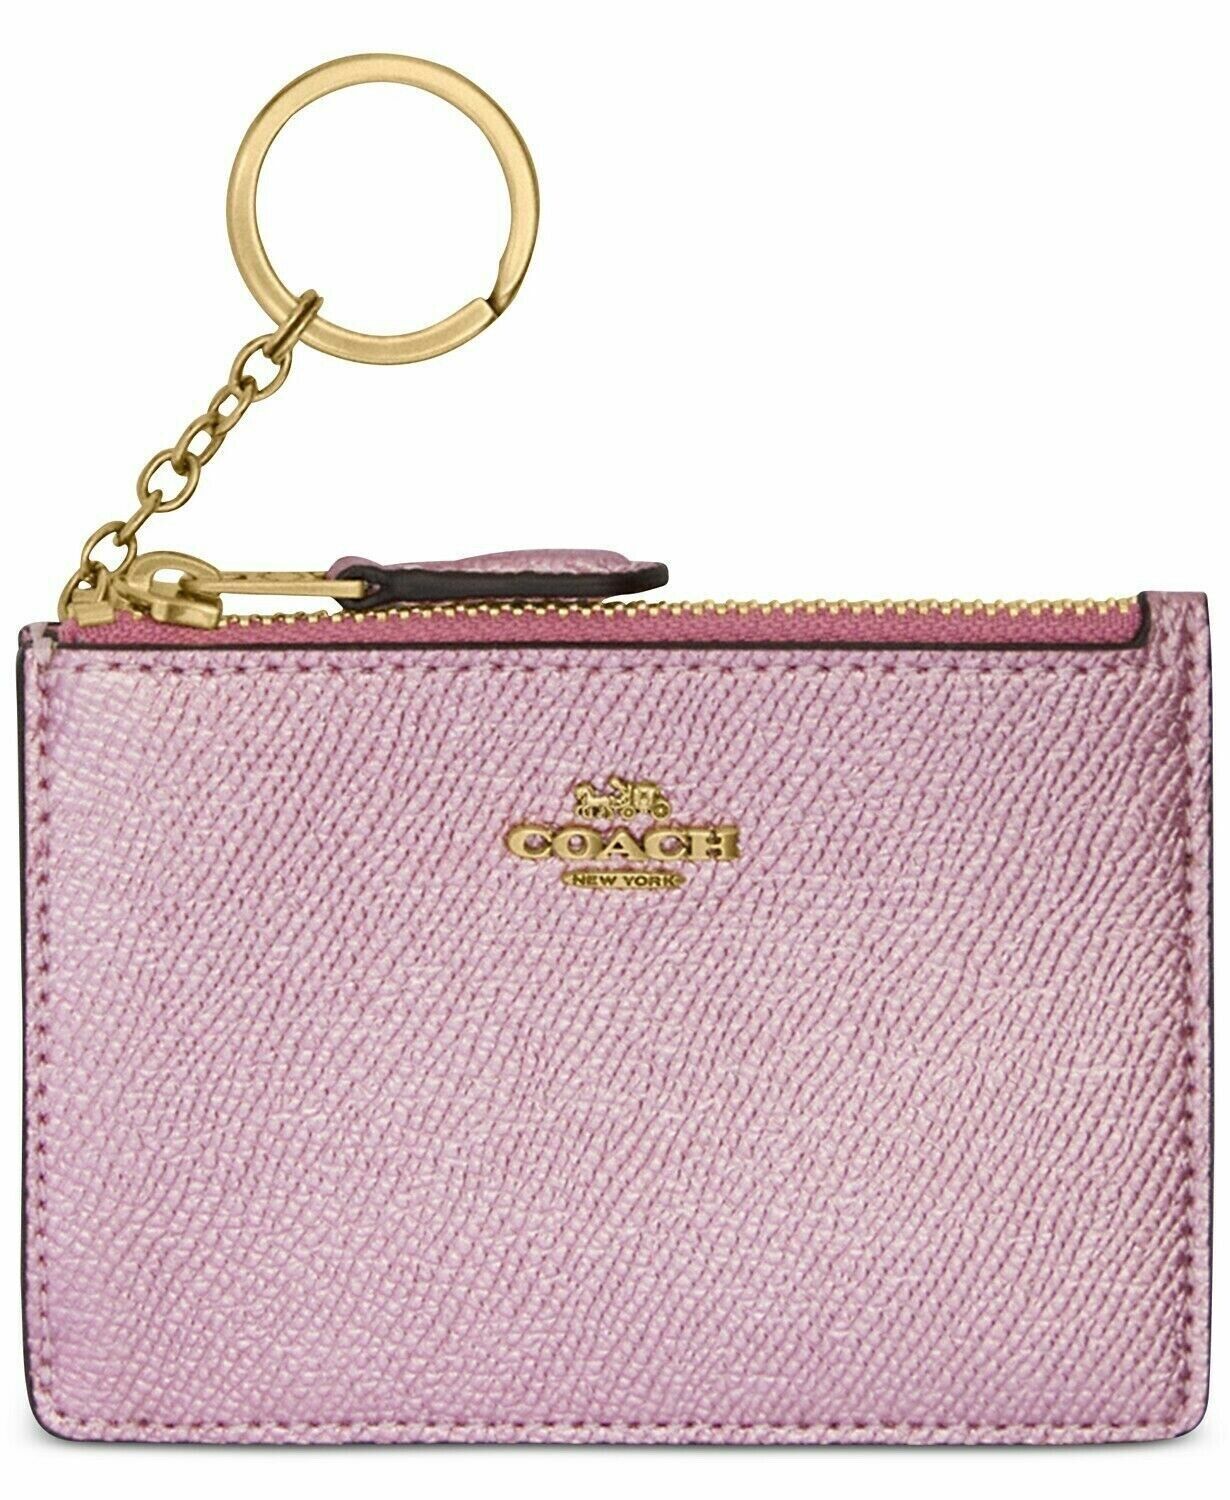 Coach Hot Pink Shoulder Bag With Logo Charm Tag Attached 